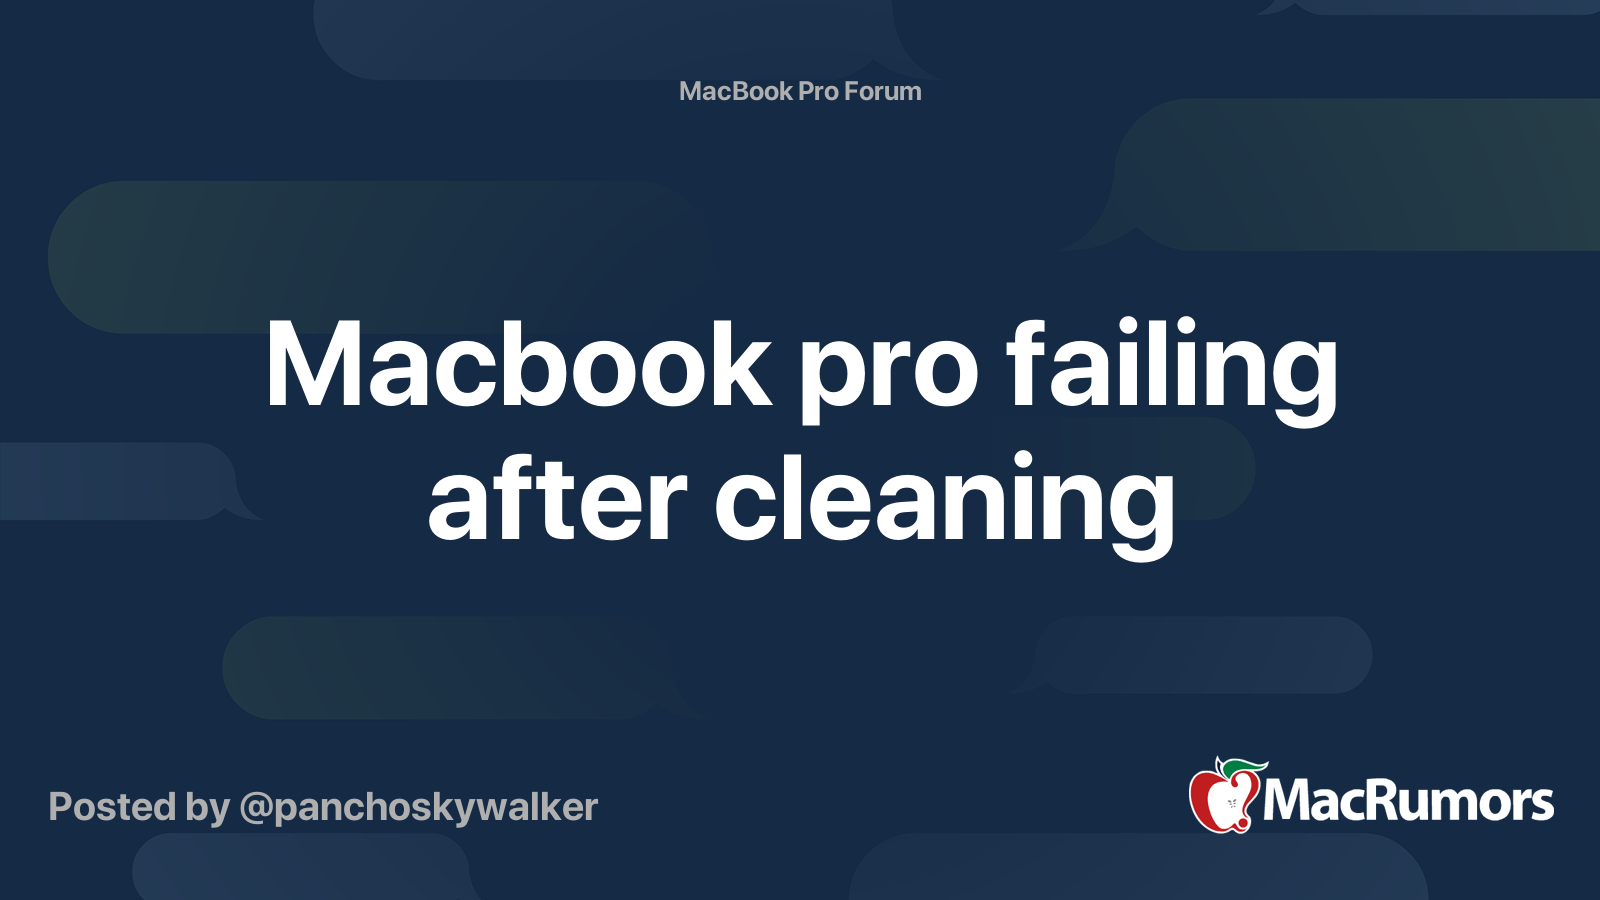 Macbook pro failing after cleaning | MacRumors Forums